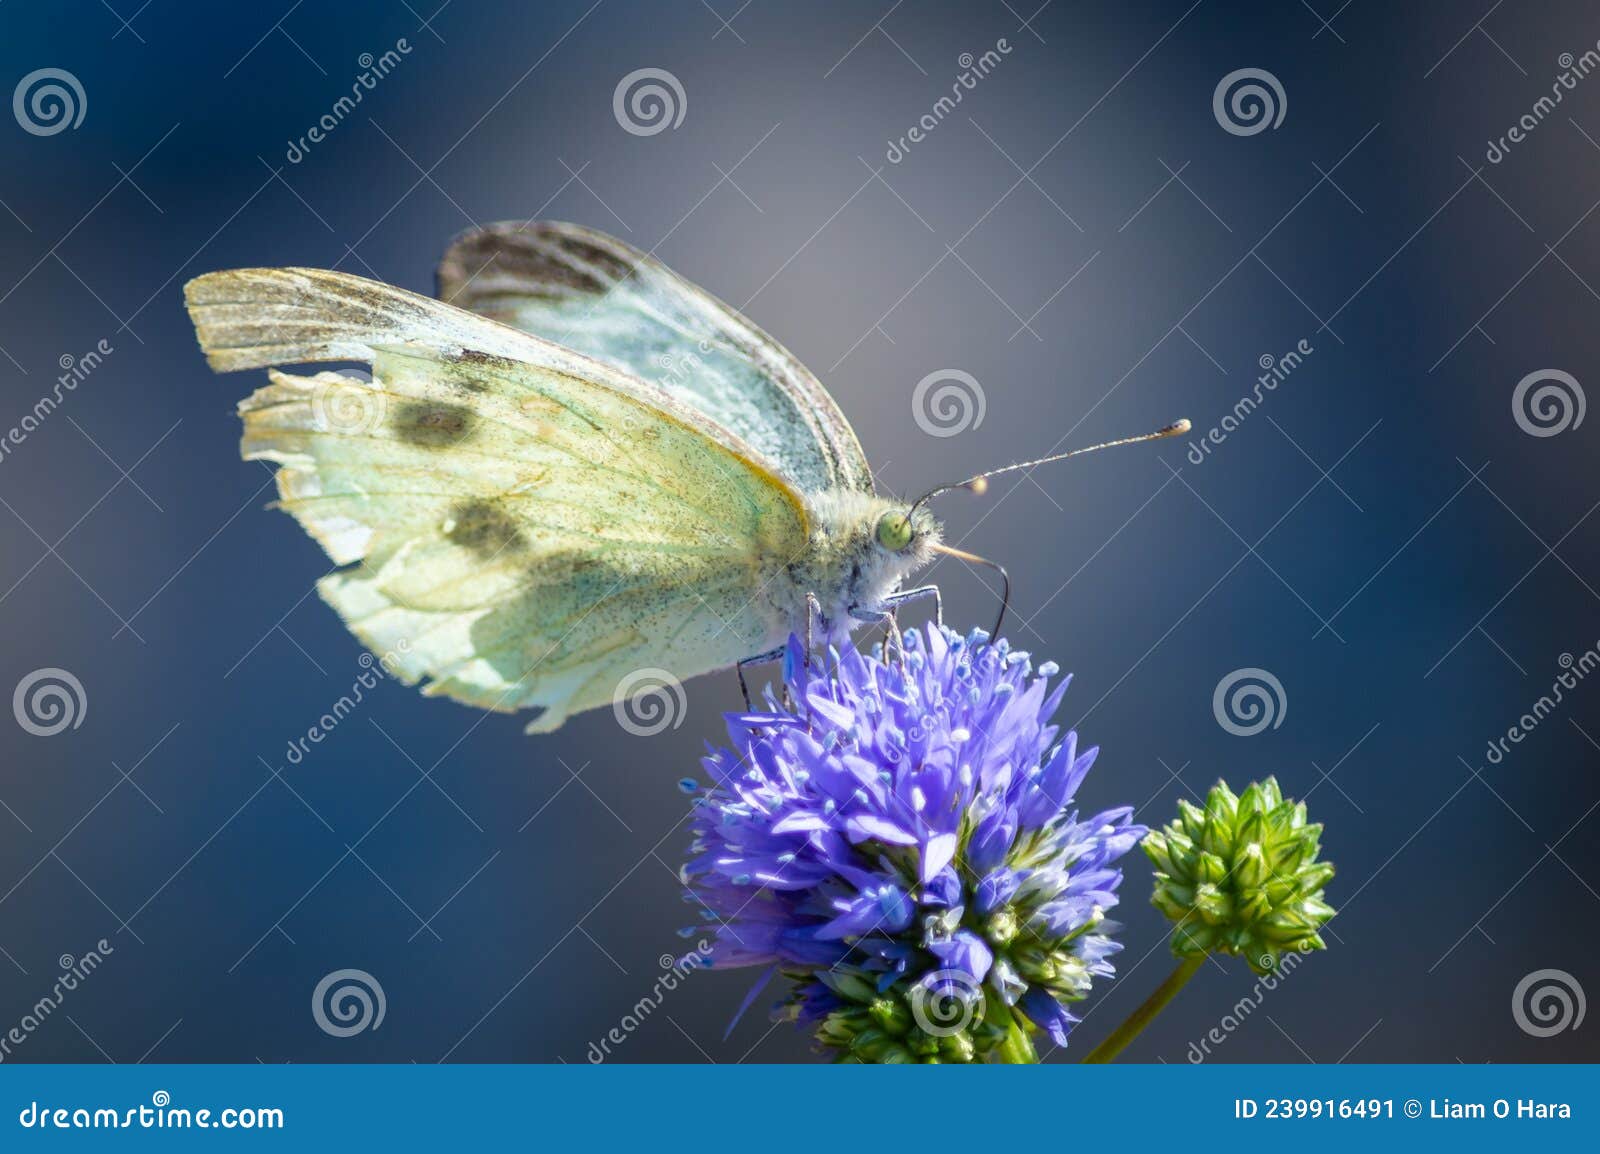 small white butterfly feeding from a tatty cornflower